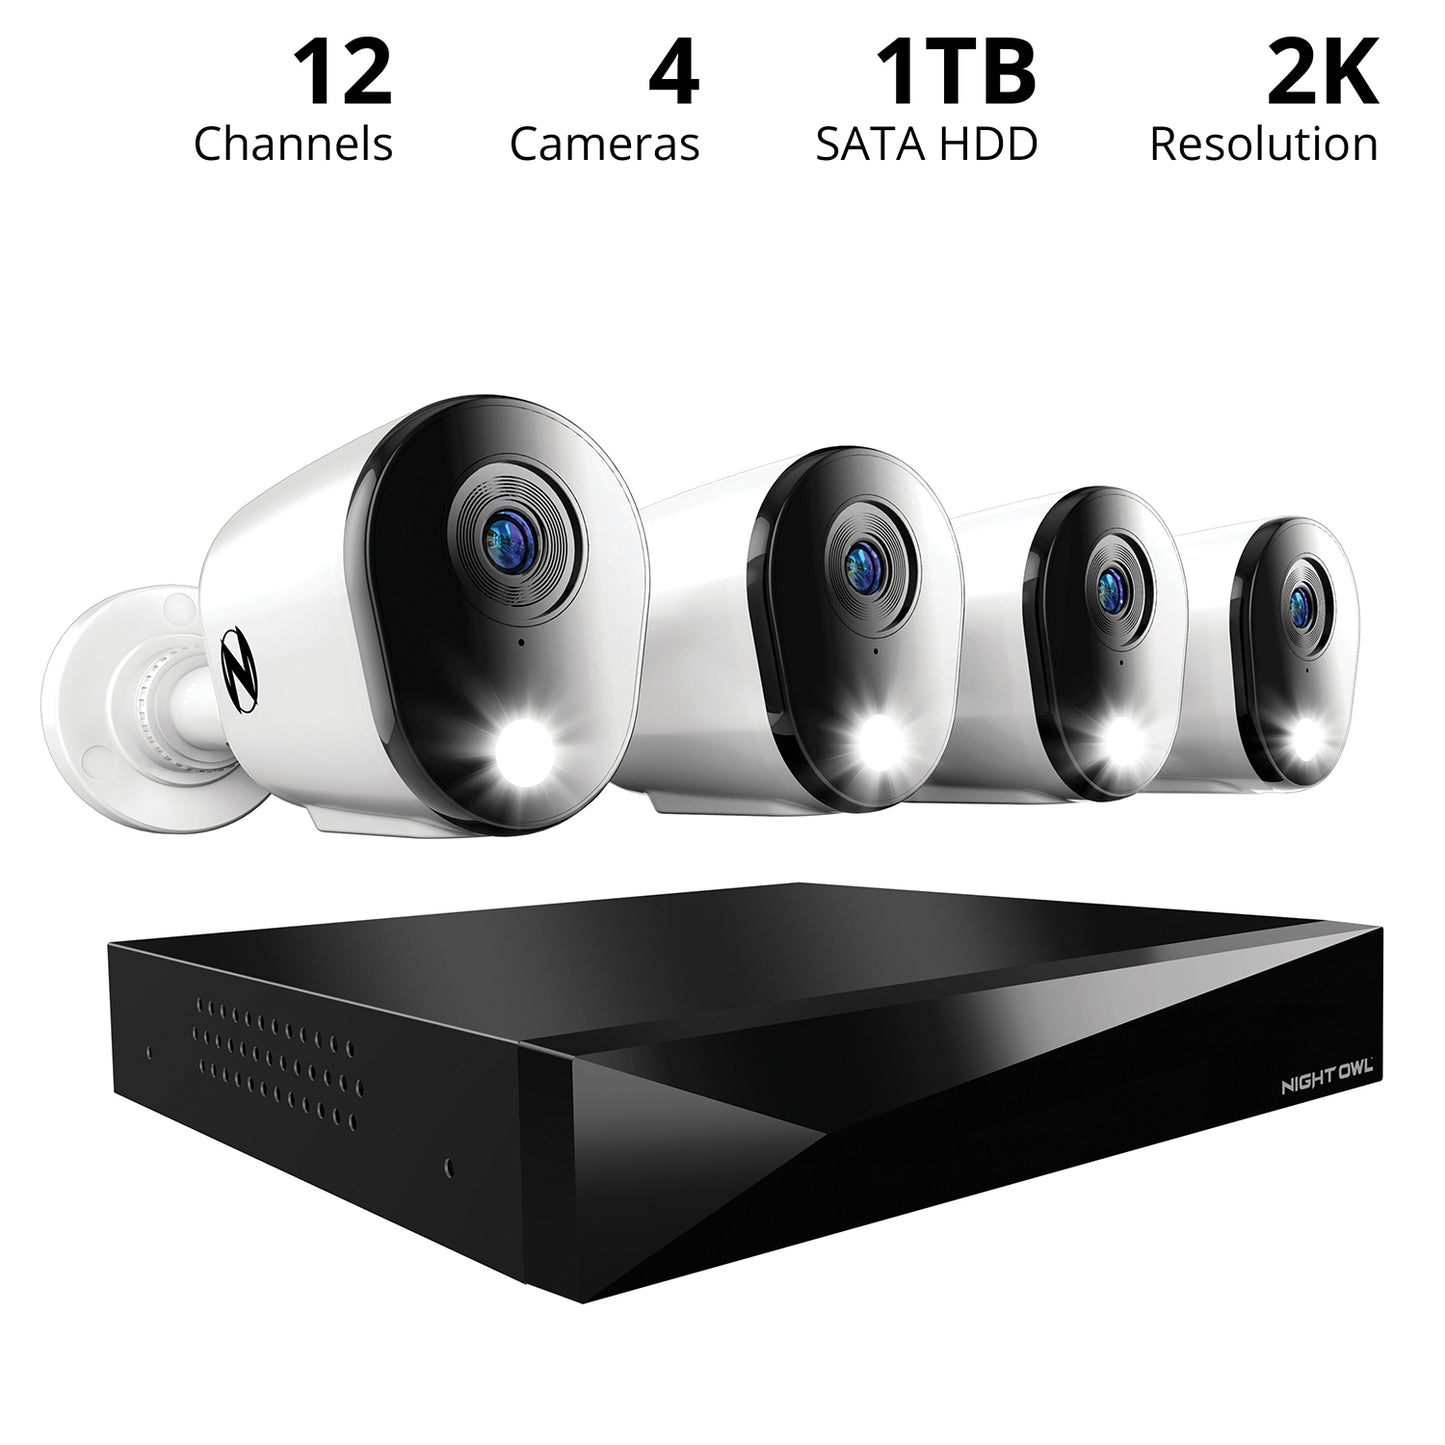 2-Way Audio 12 Channel DVR Security System with 1TB Hard Drive and 4 Wired 2K Deterrence Cameras - Camera Cables Not Included